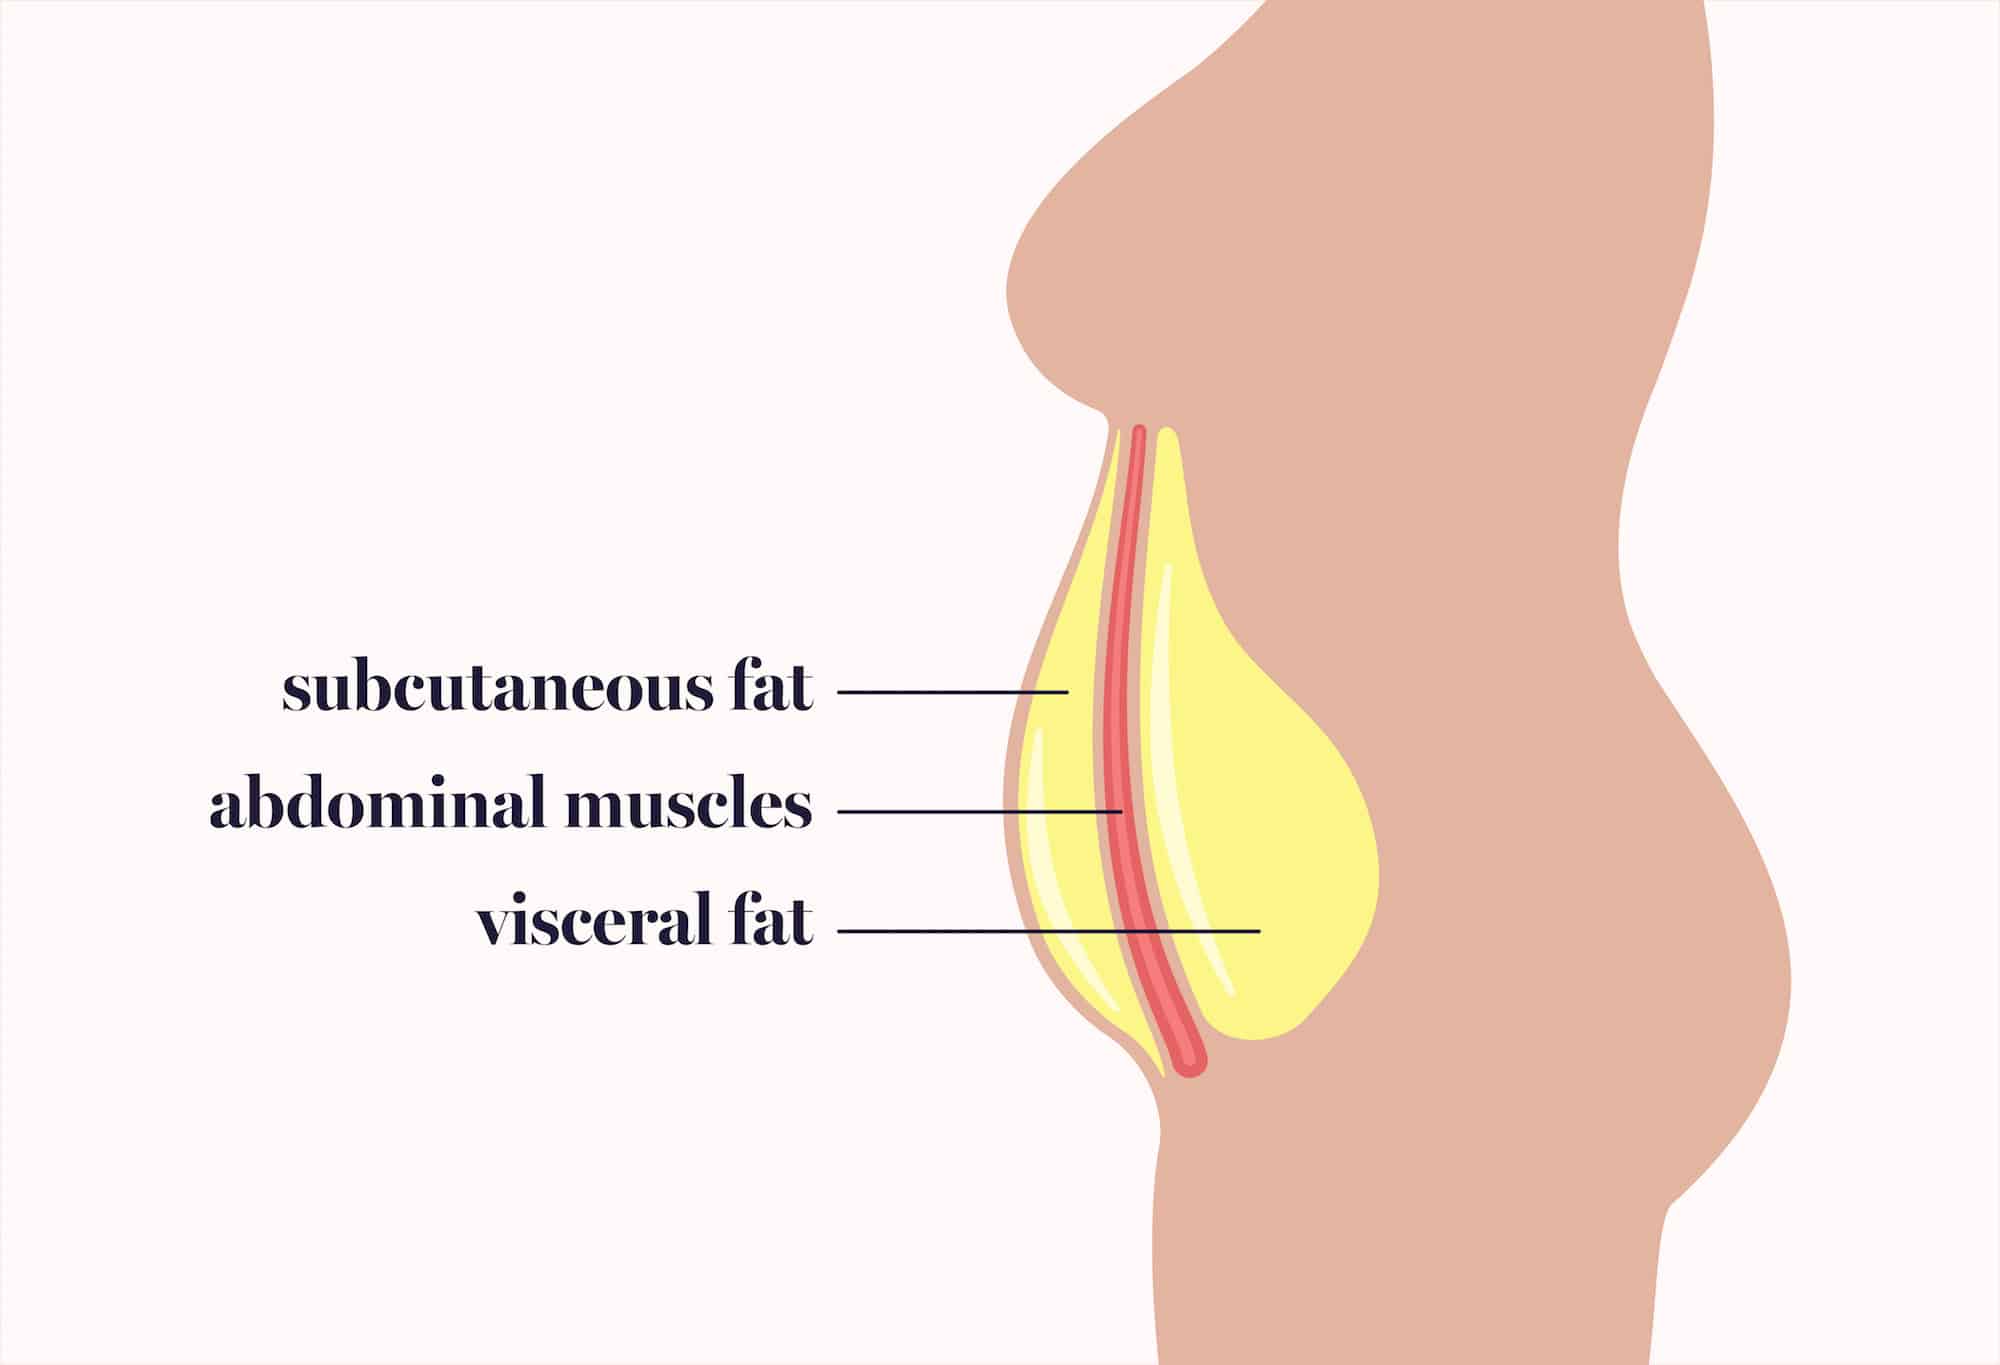 Subcutaneous and visceral fat location